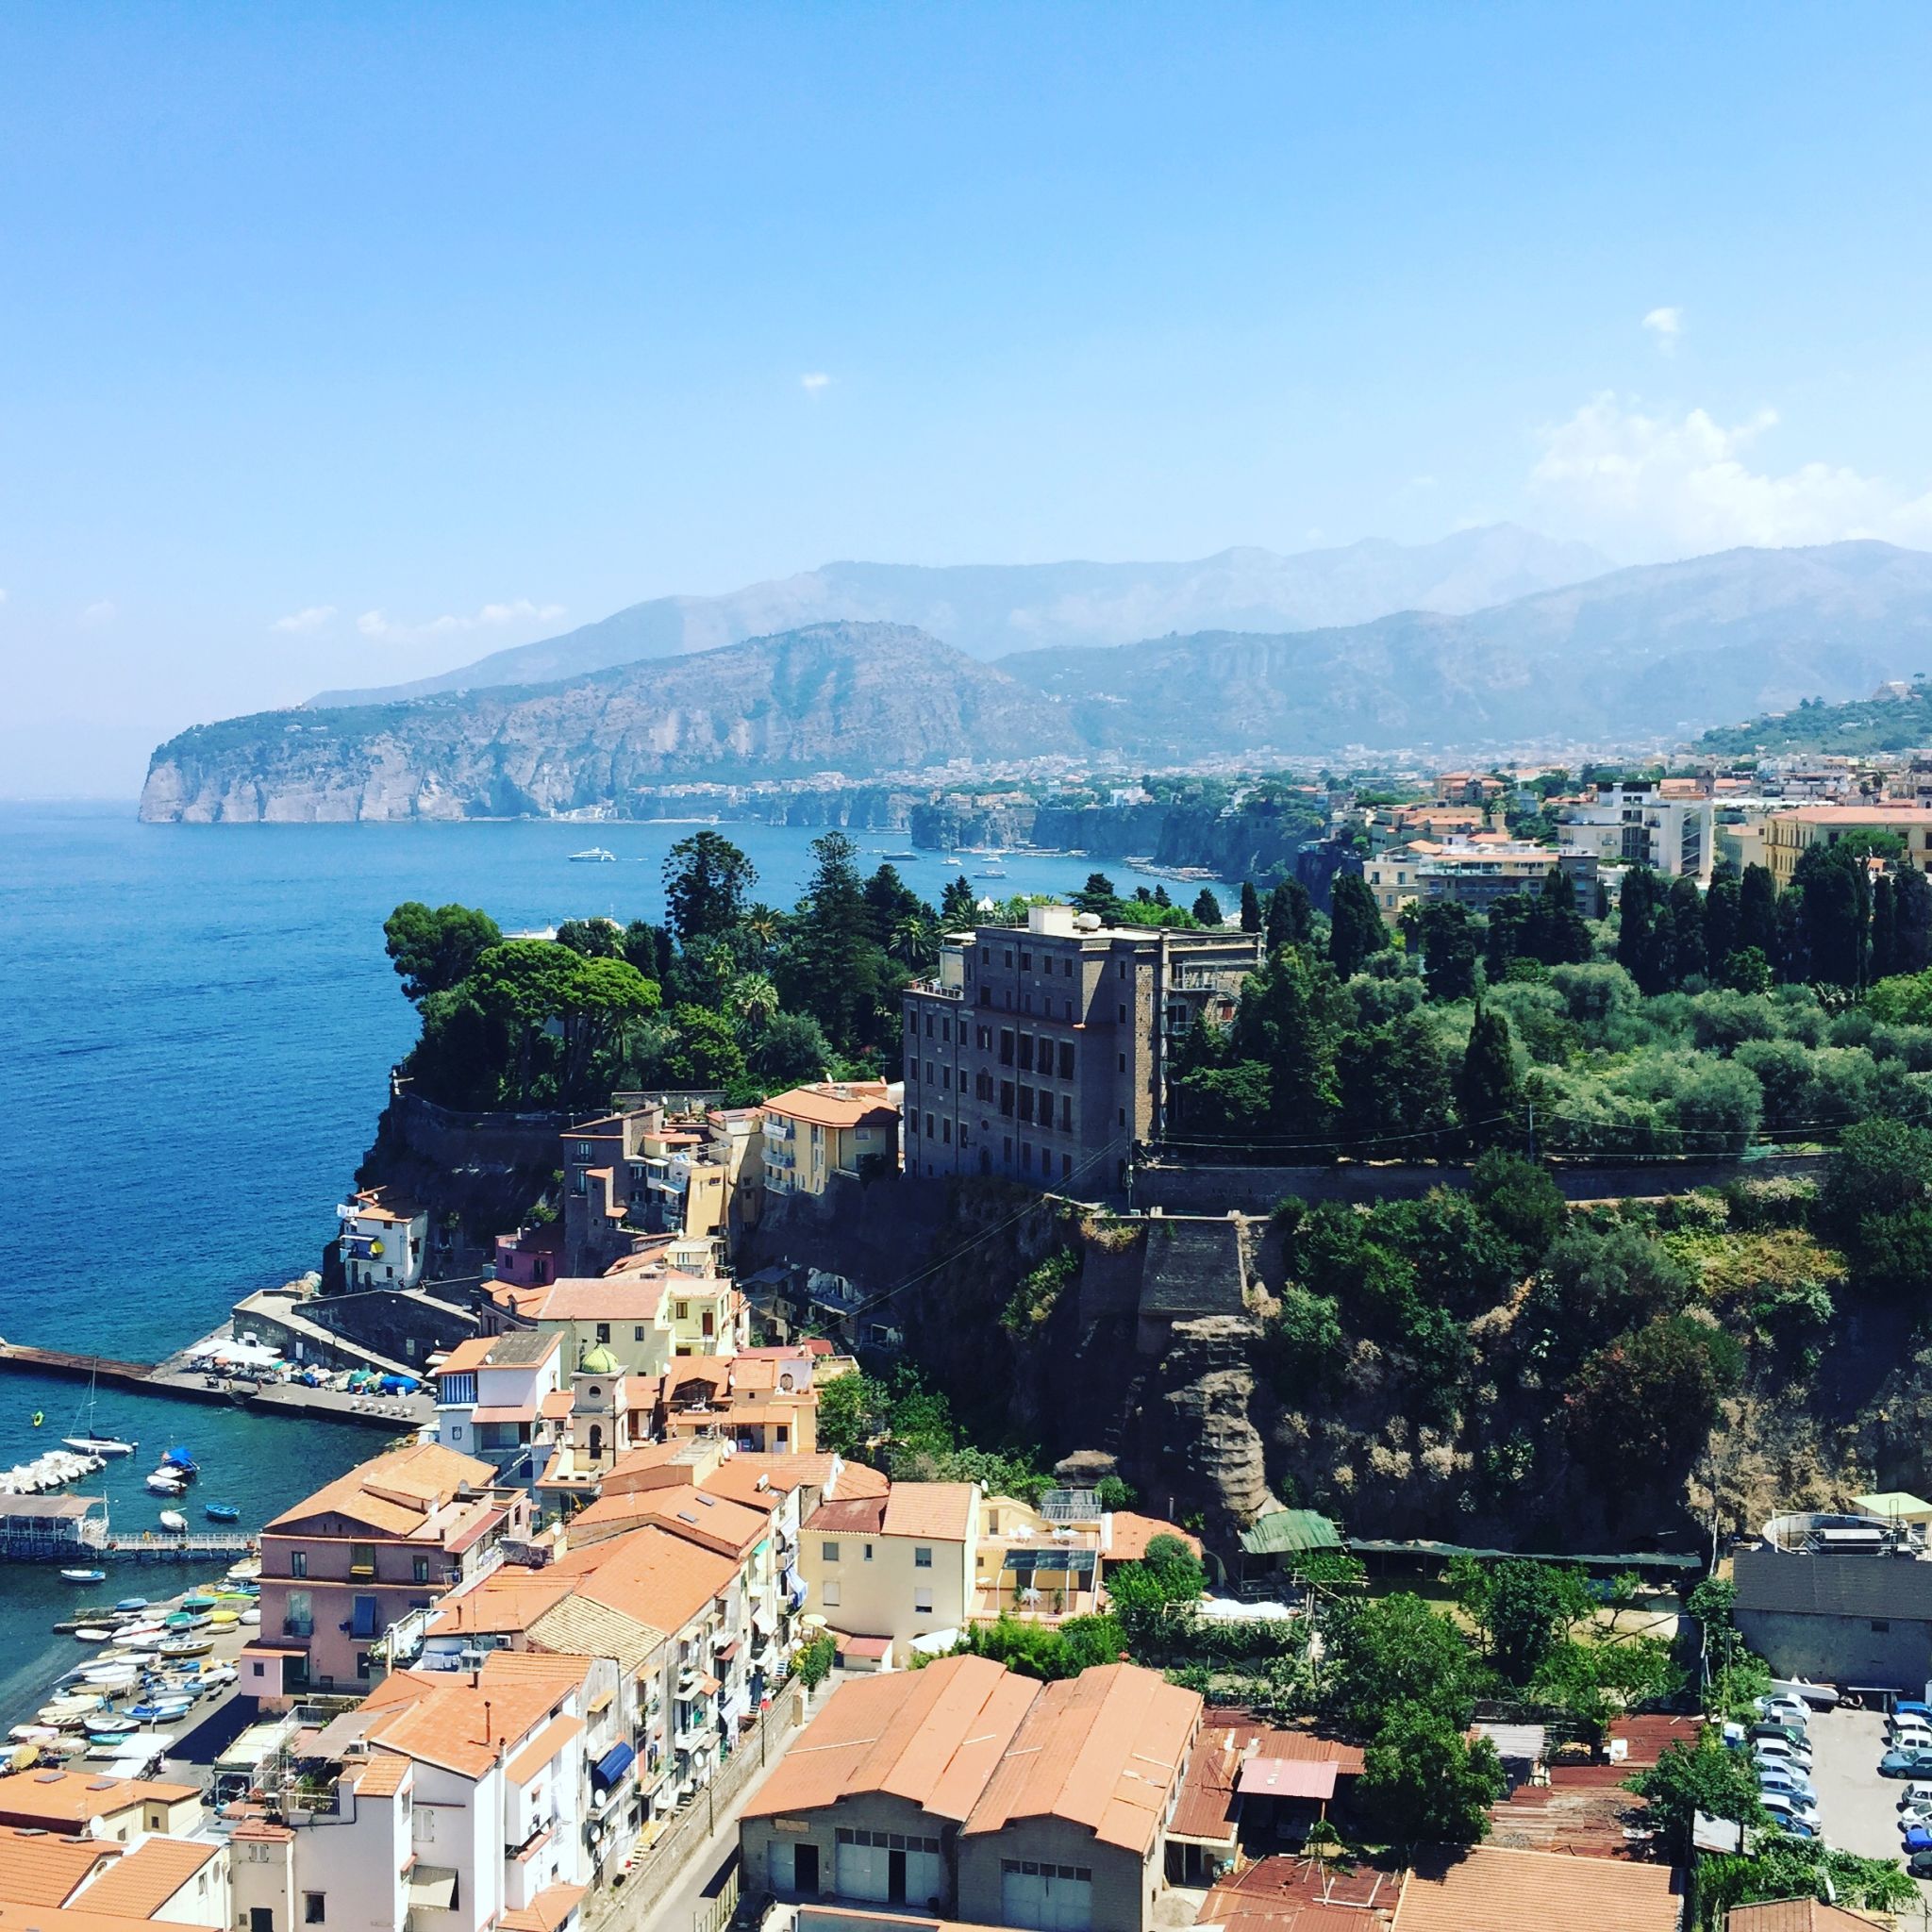 10 reasons why we love Naples (Italy)